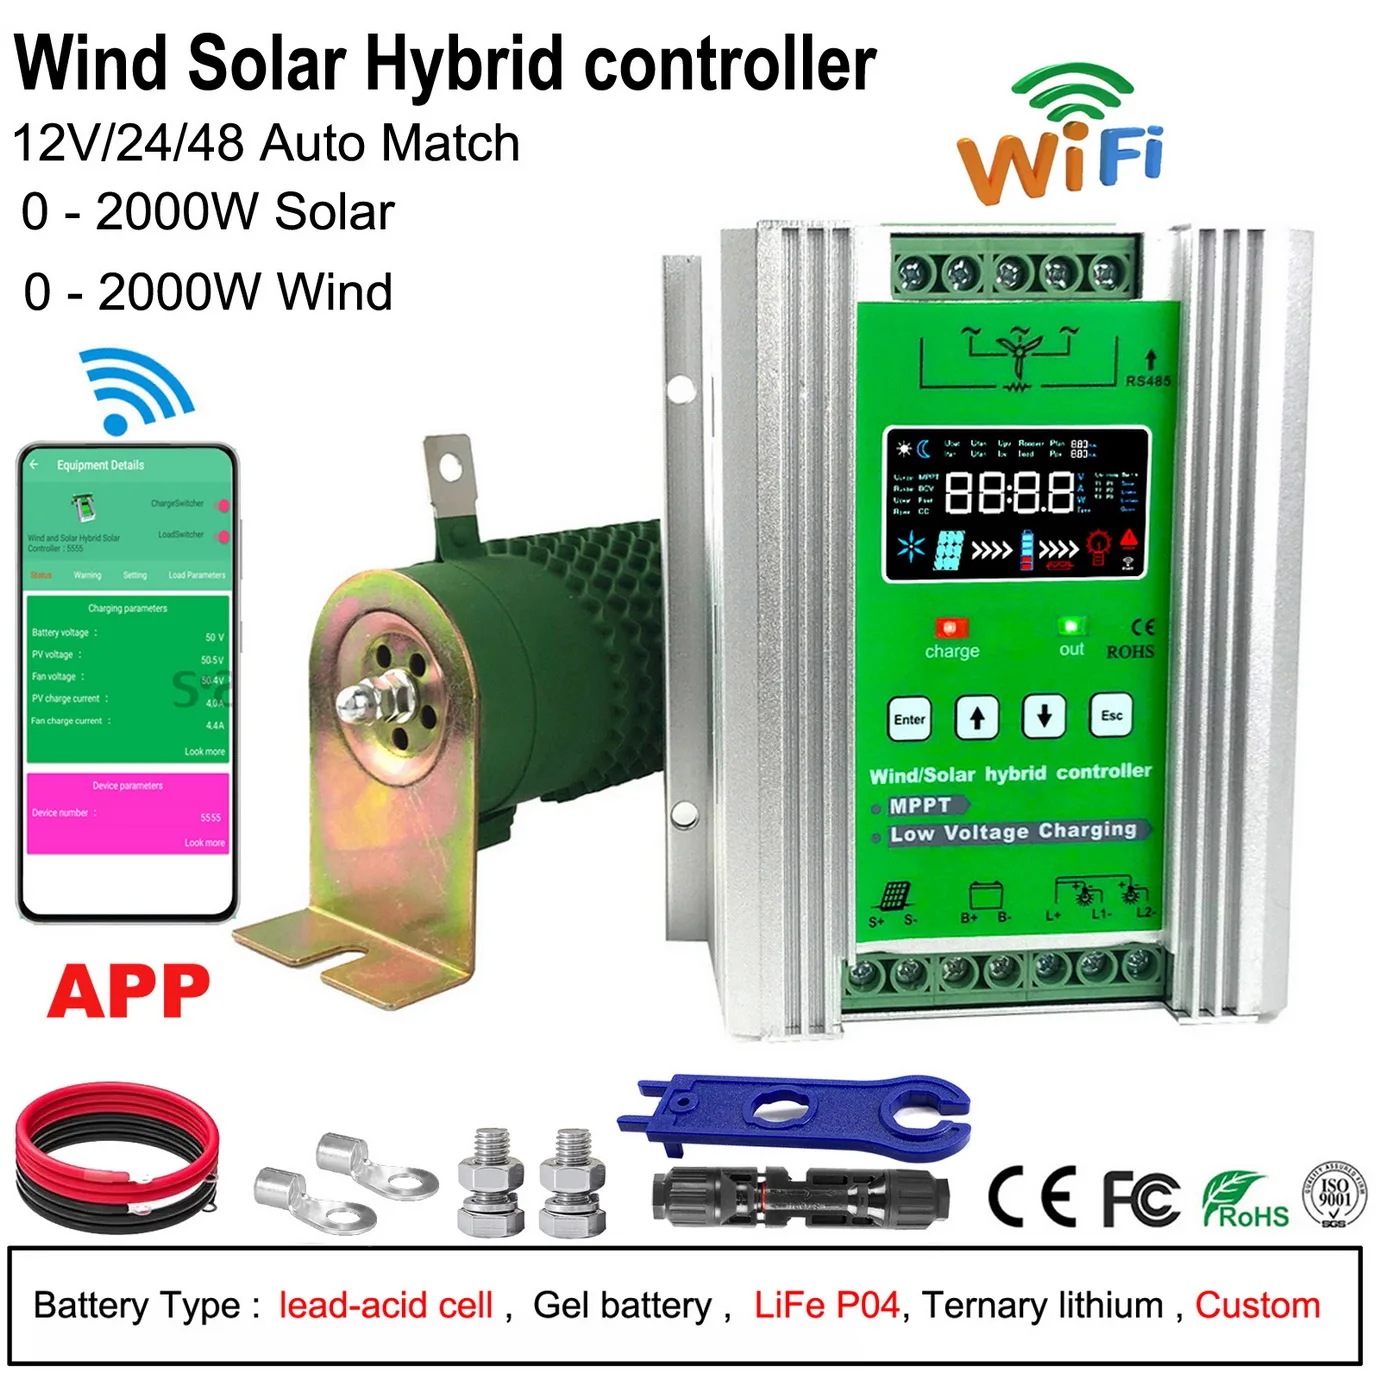 

1000W 2000W 3000W MPPT Hybrid Wind Solar Charge Controlle WIth WIFI GPRS Ethernet Monitoring